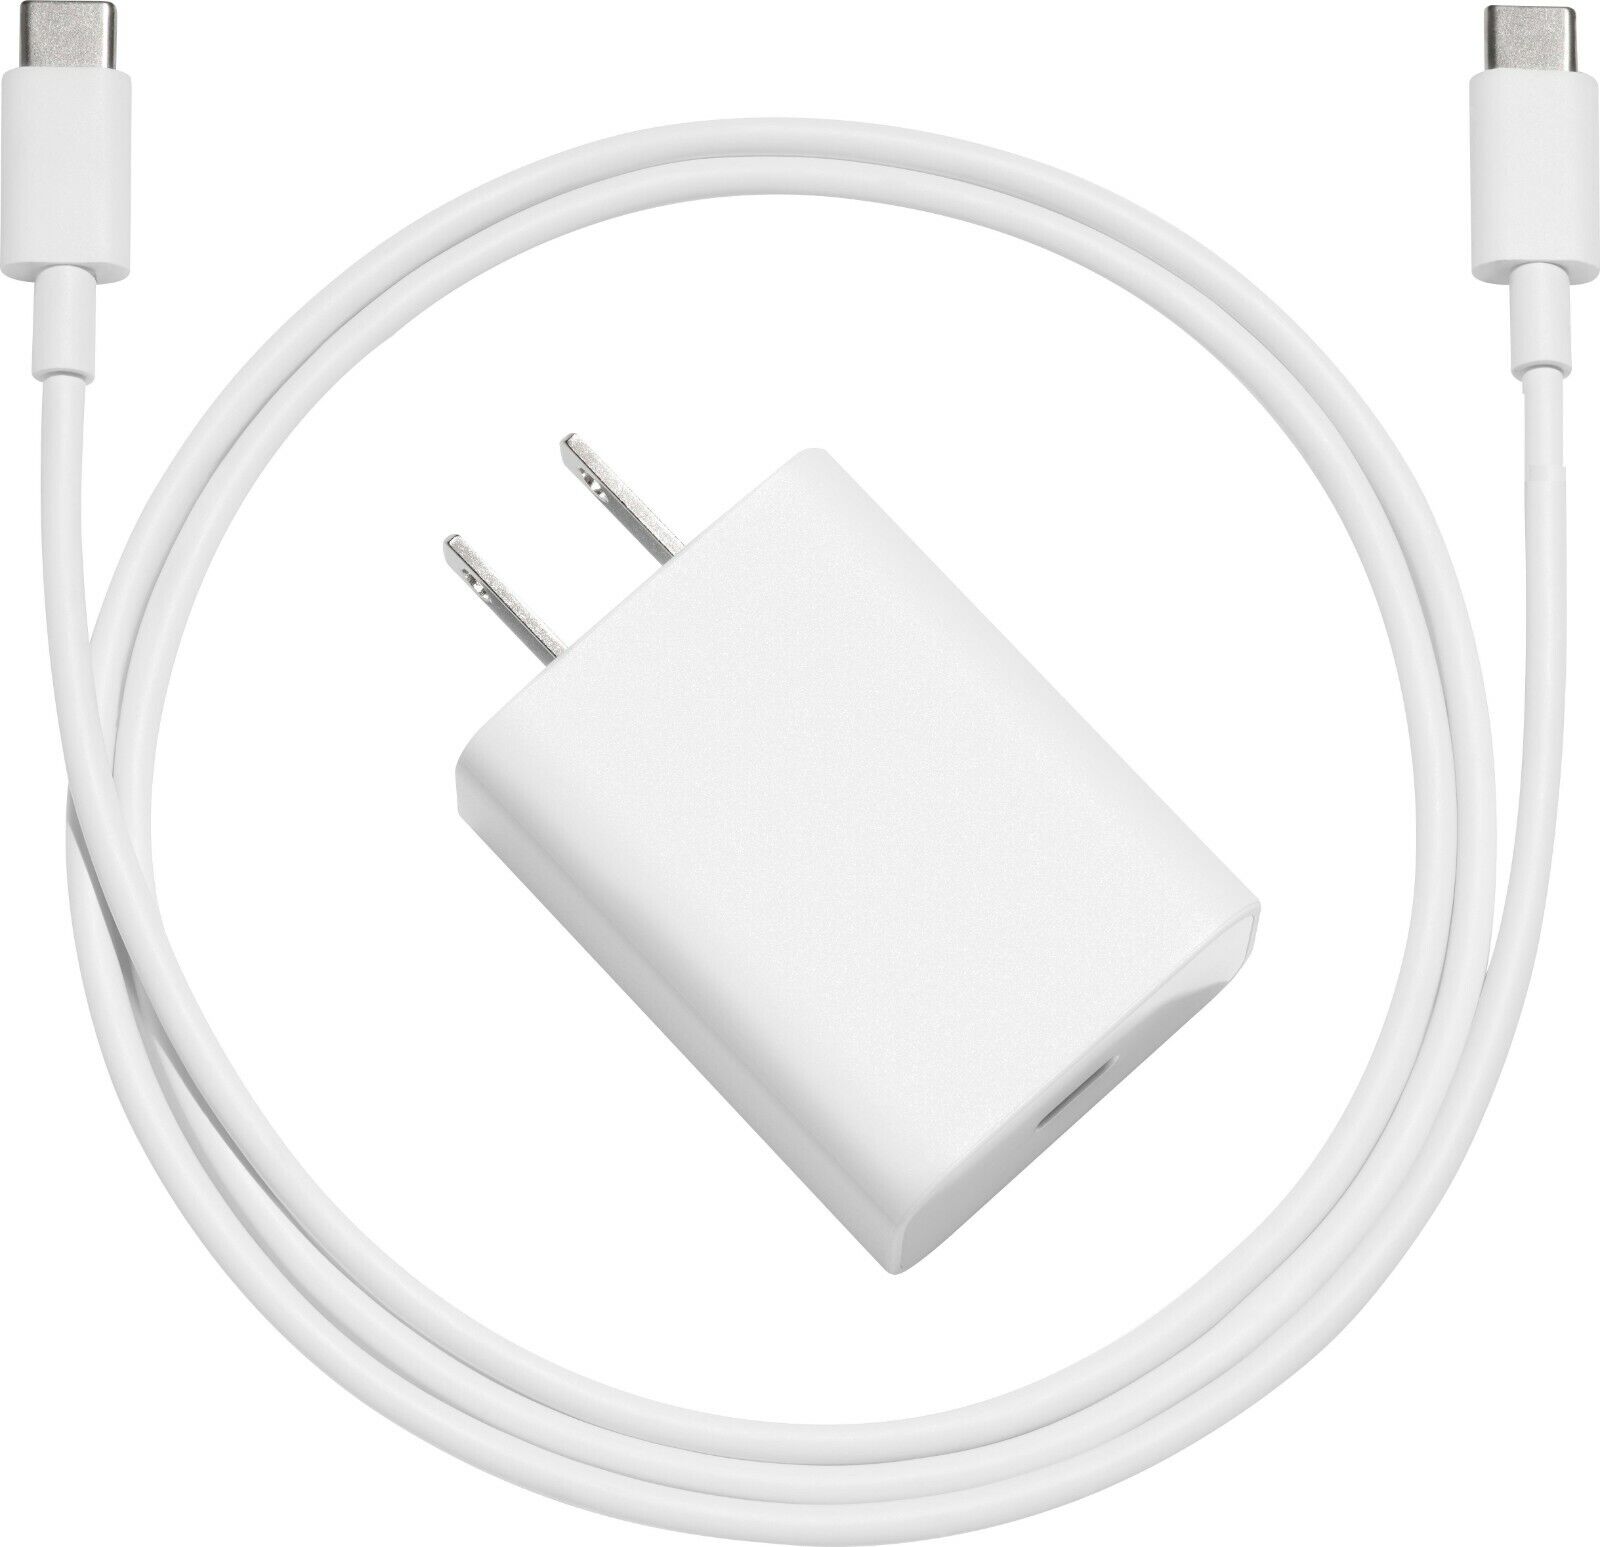 *Brand NEW*GOOGLE 18W FAST USB-C POWER ADAPTER PLUS 3FT TYPE C CABLE - GA00193-US - GENUINE - Click Image to Close